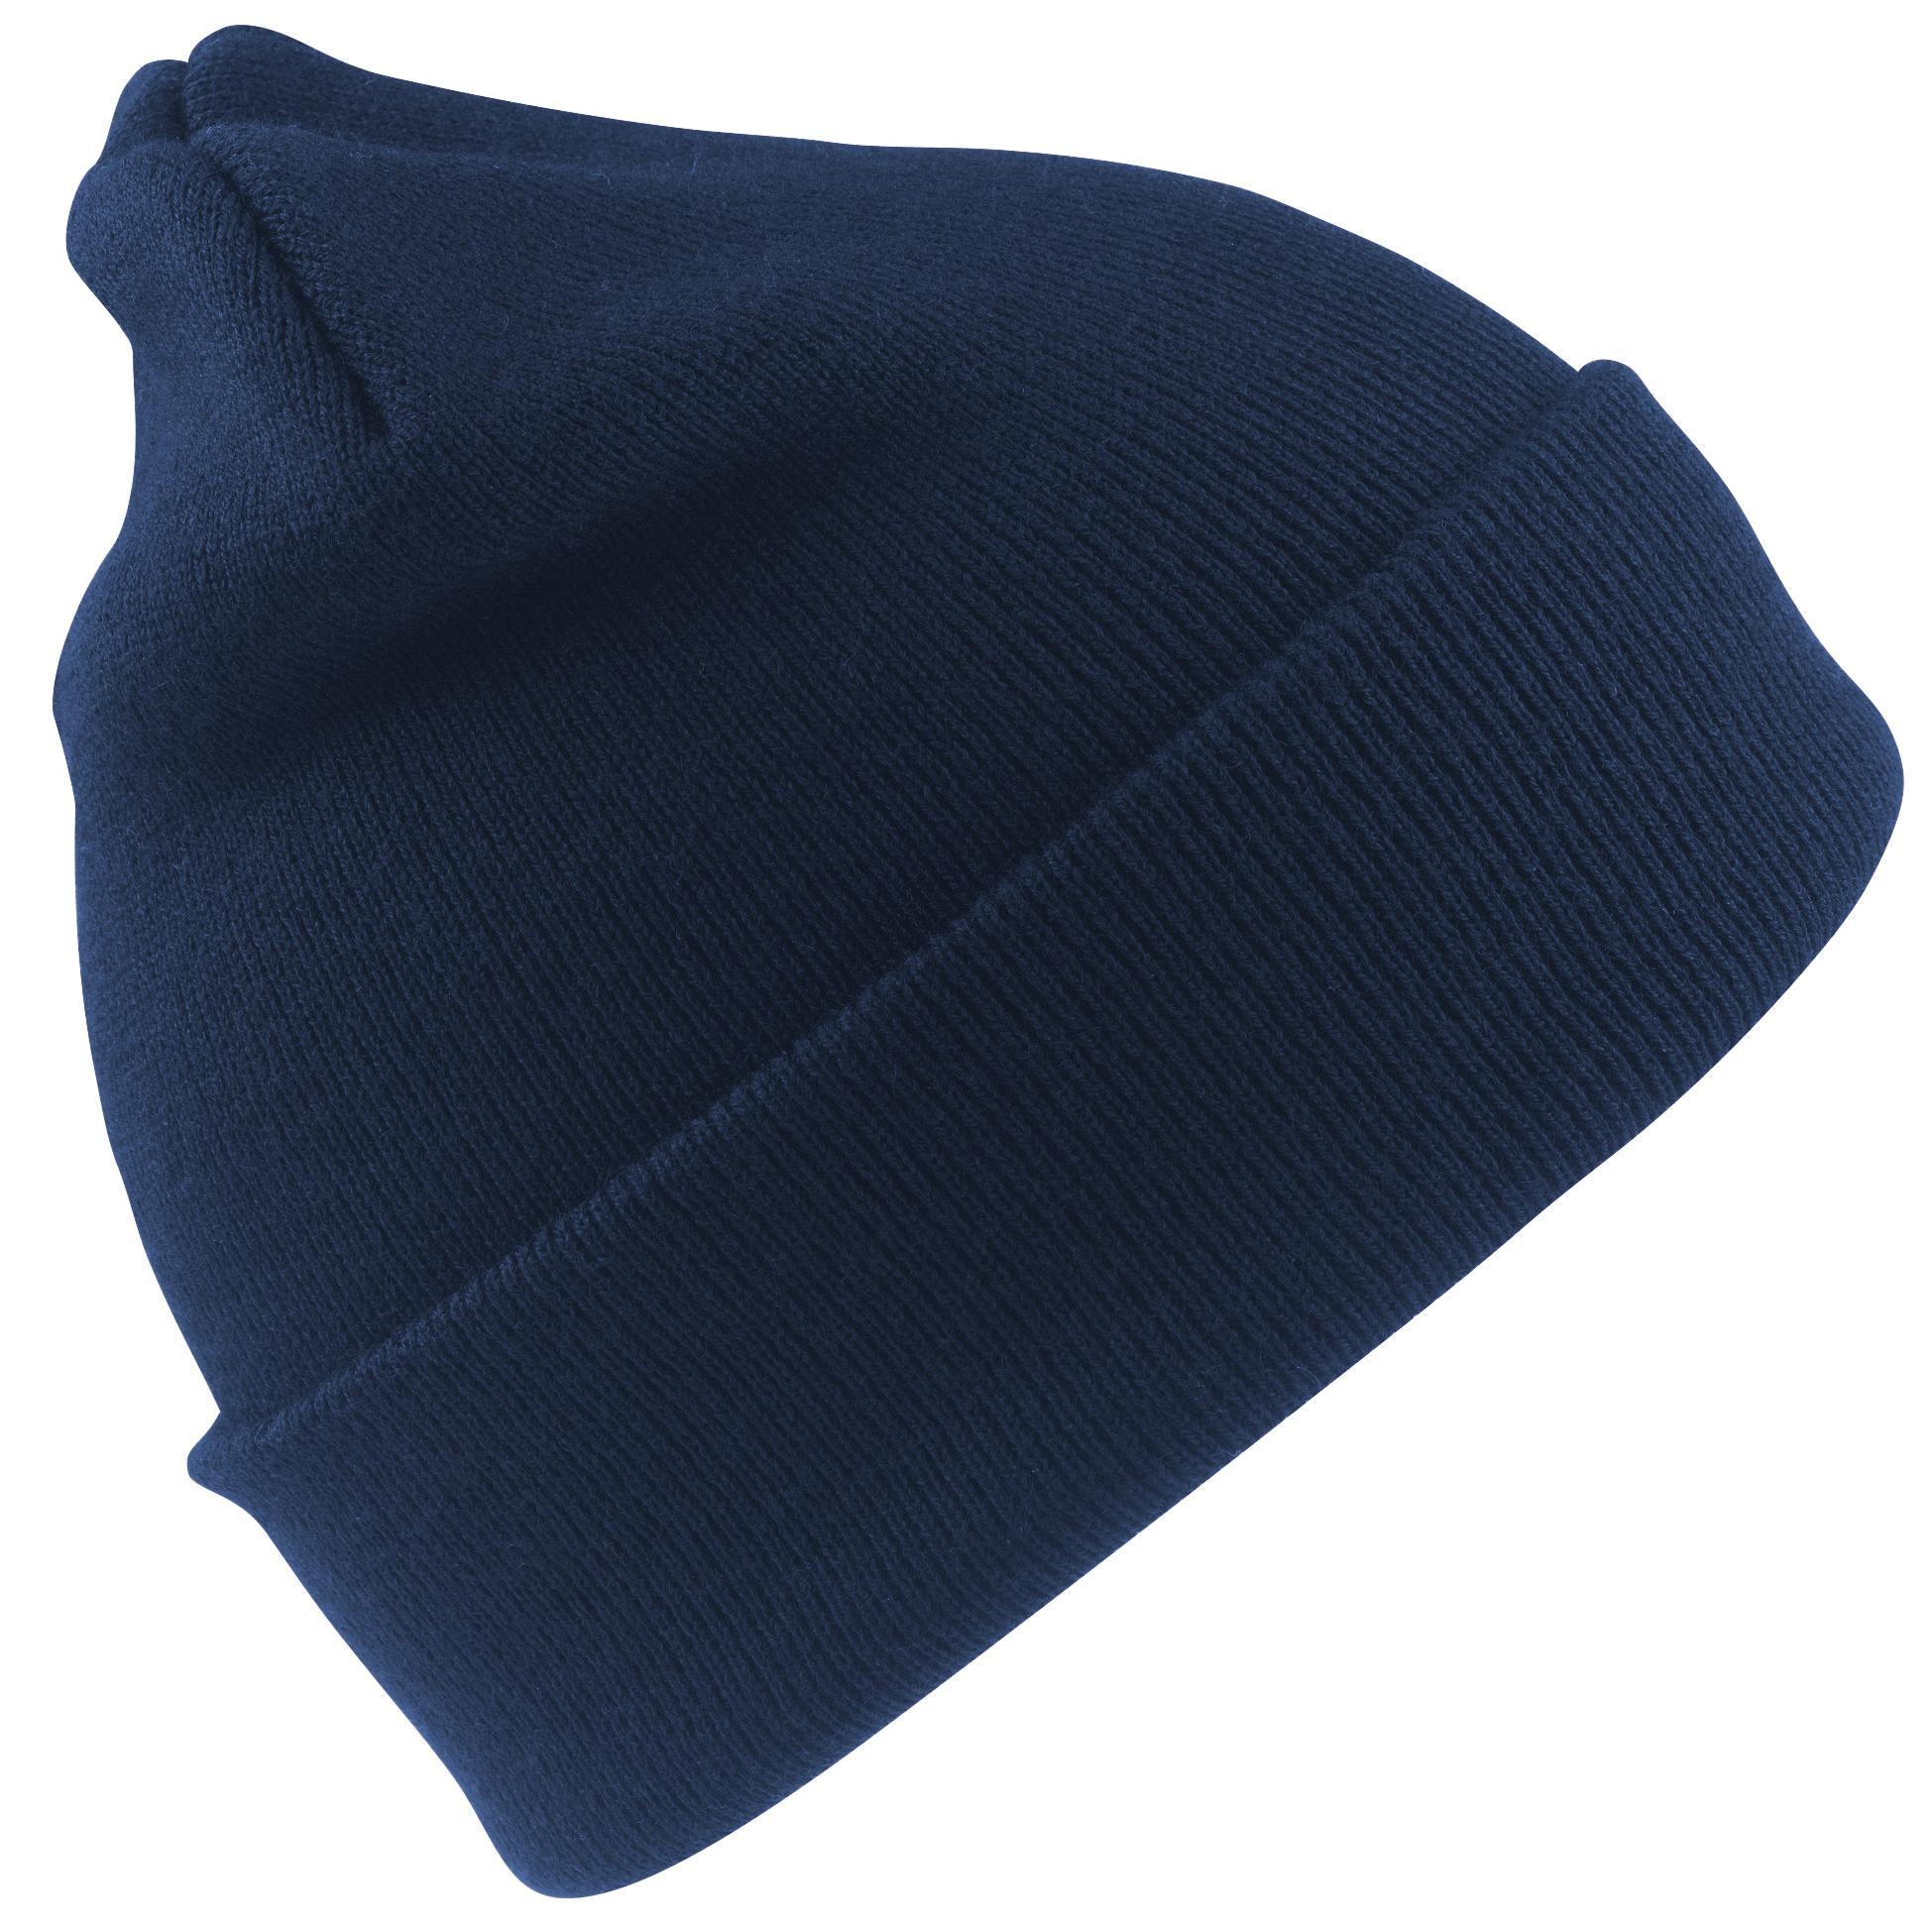 Result Wooly Heavyweight Knit Thermal Winter/Ski Hat (Navy Blue) (One Size)